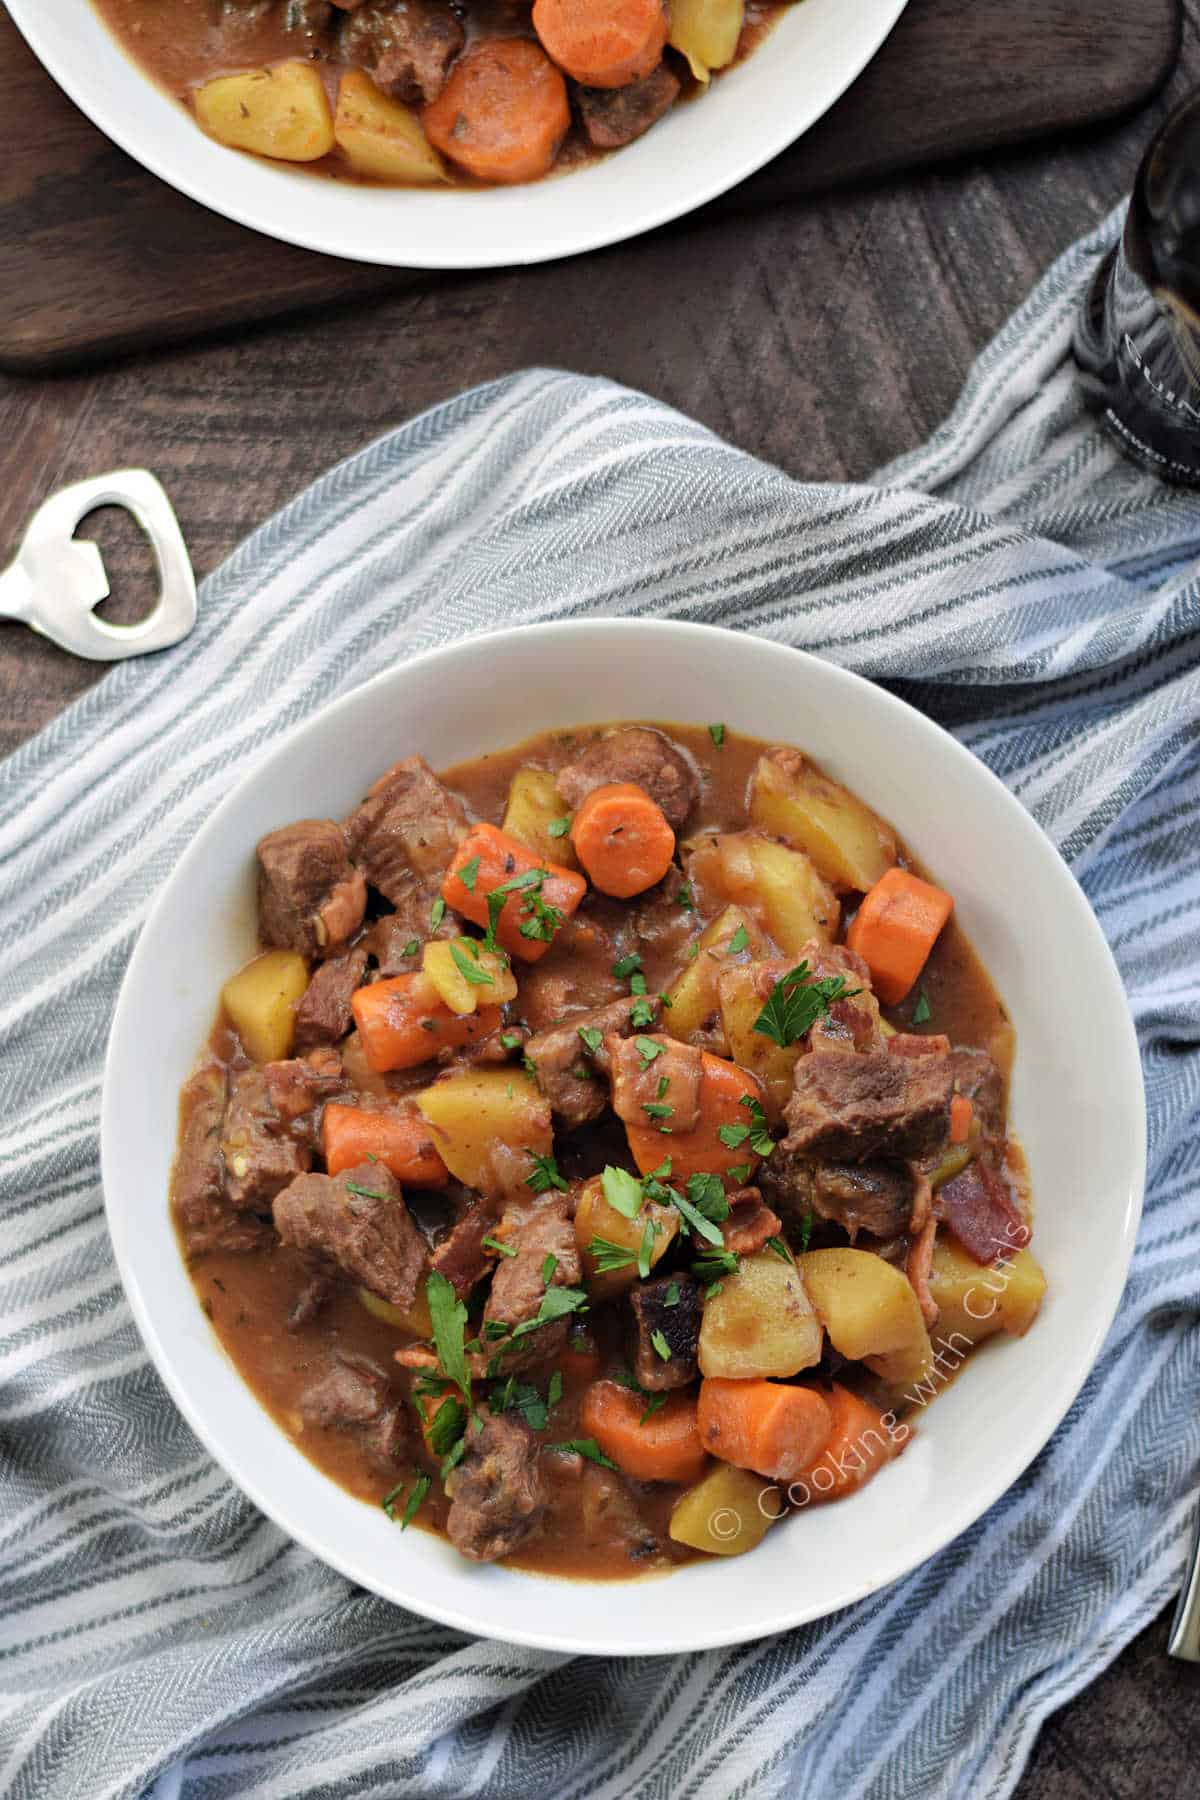 Looking down on two bowls of beef stew with carrots and potatoes.